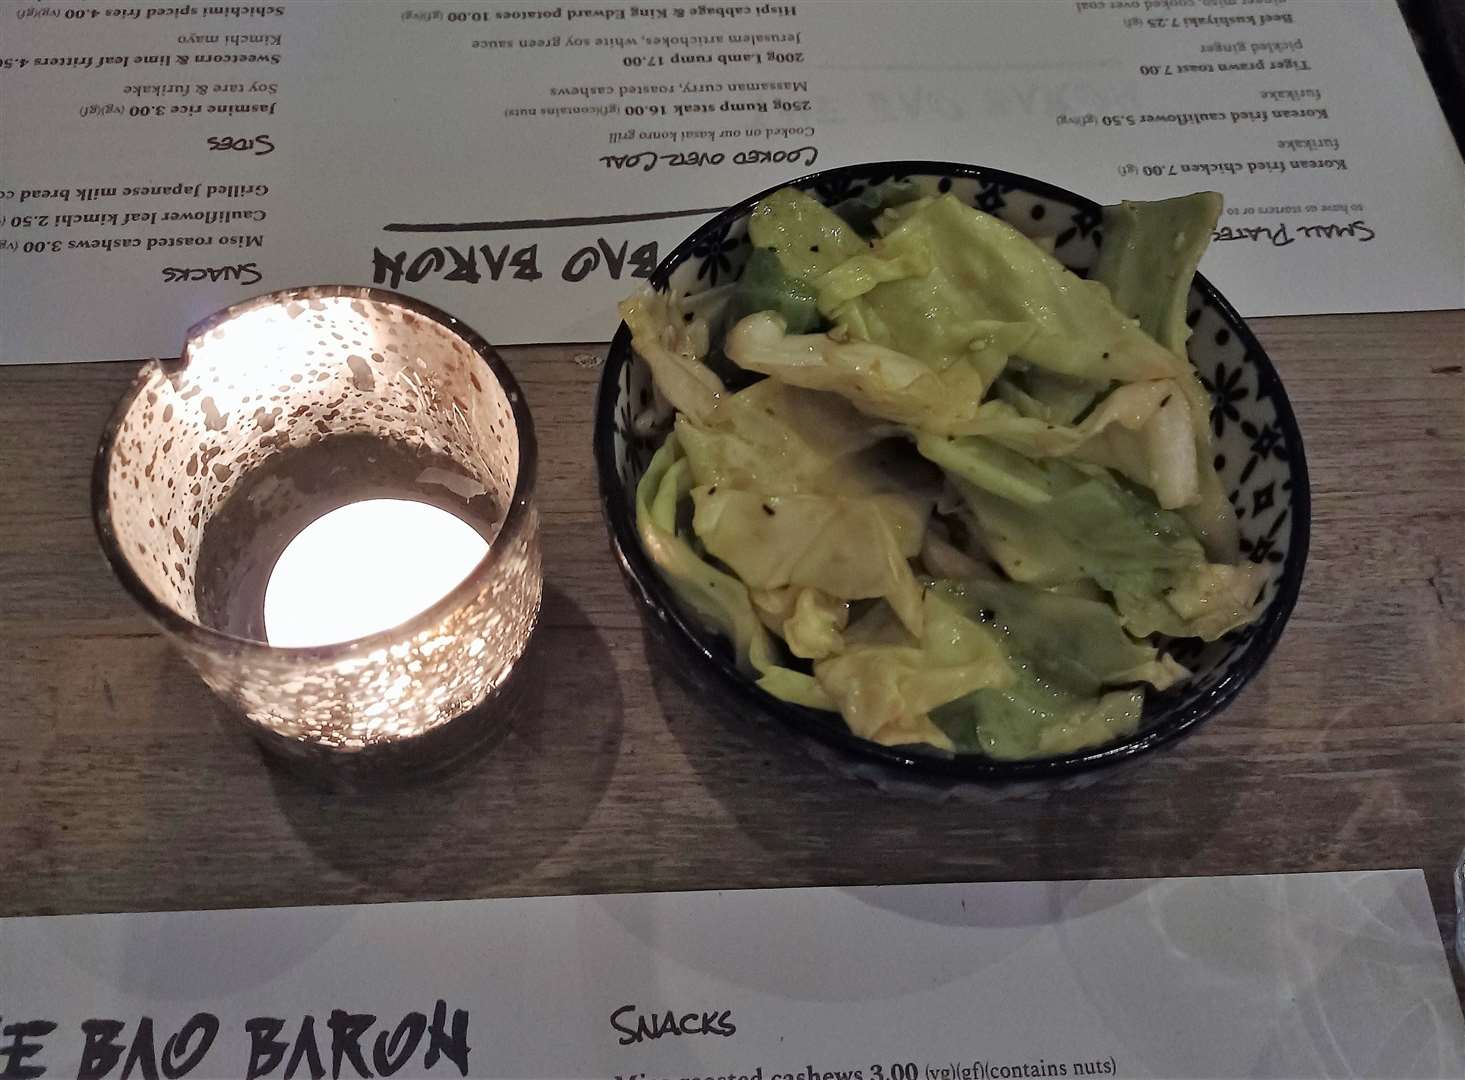 The "addictive cabbage" appetiser at The Bao Baron in Folkestone